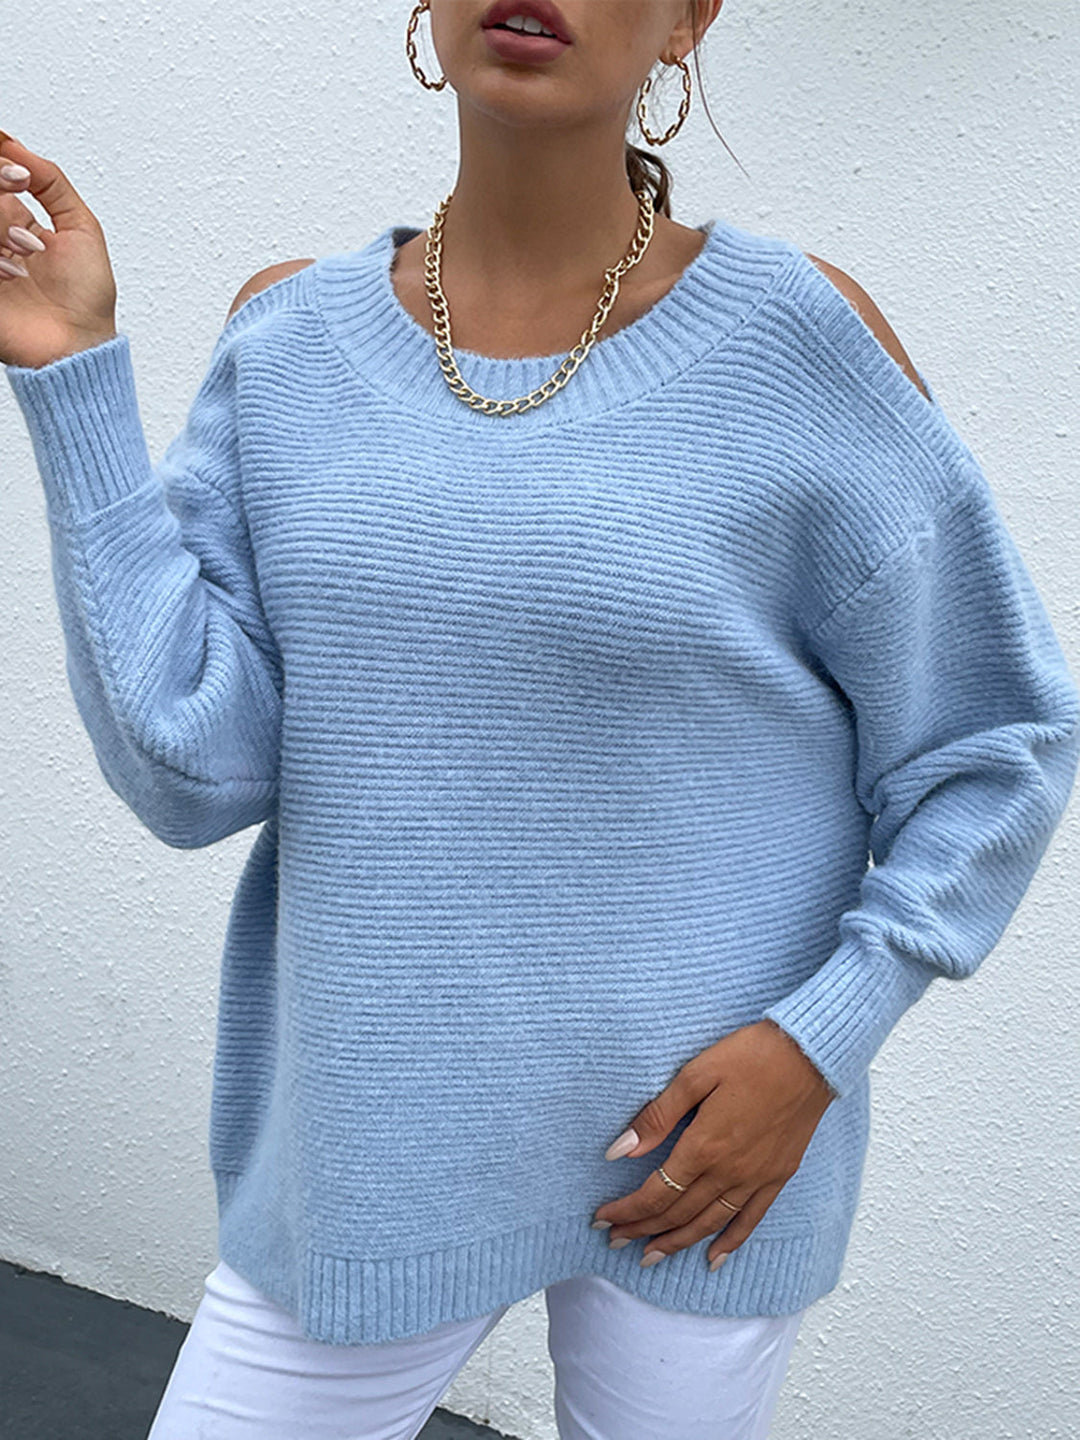 Misty Blue - Round Neck Cold Shoulder Sweater - Sizes S-L Ti Amo I love you